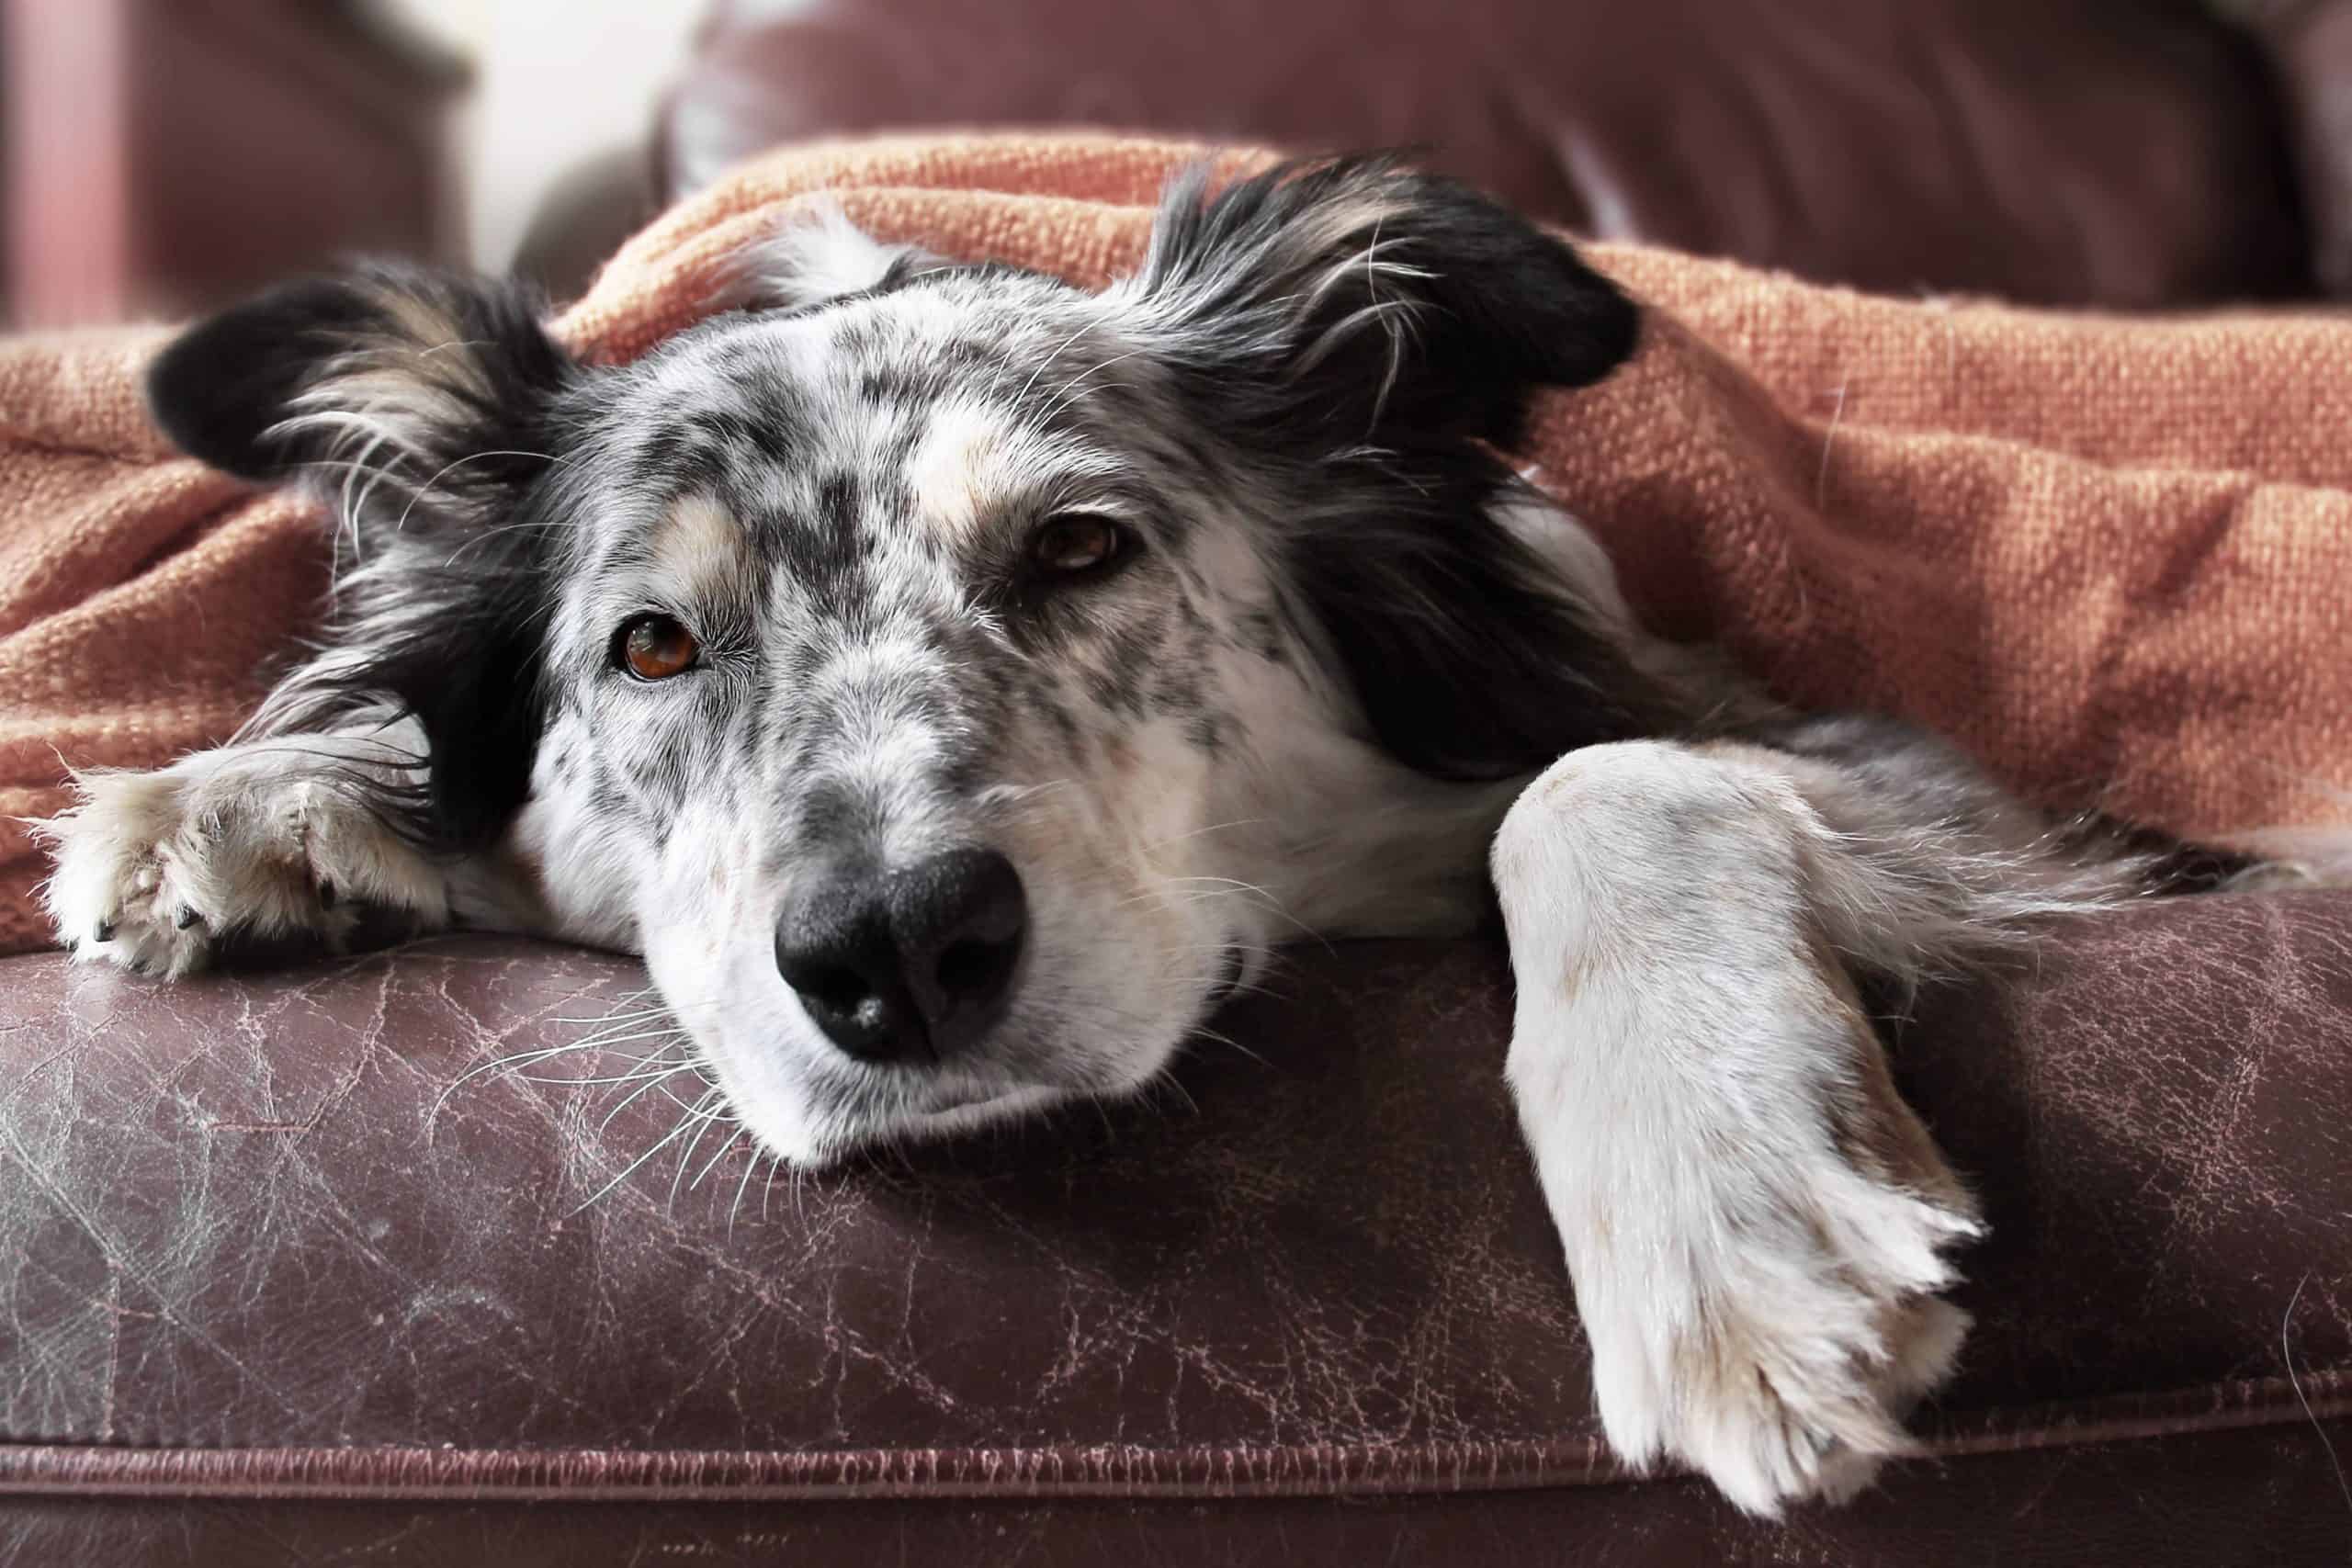 Sick Australian shepherd rests on a couch while covered with a blanket. Dogs commonly contract kennel cough at places like dog parks, training practices, boarding and daycare facilities, and dog shows.